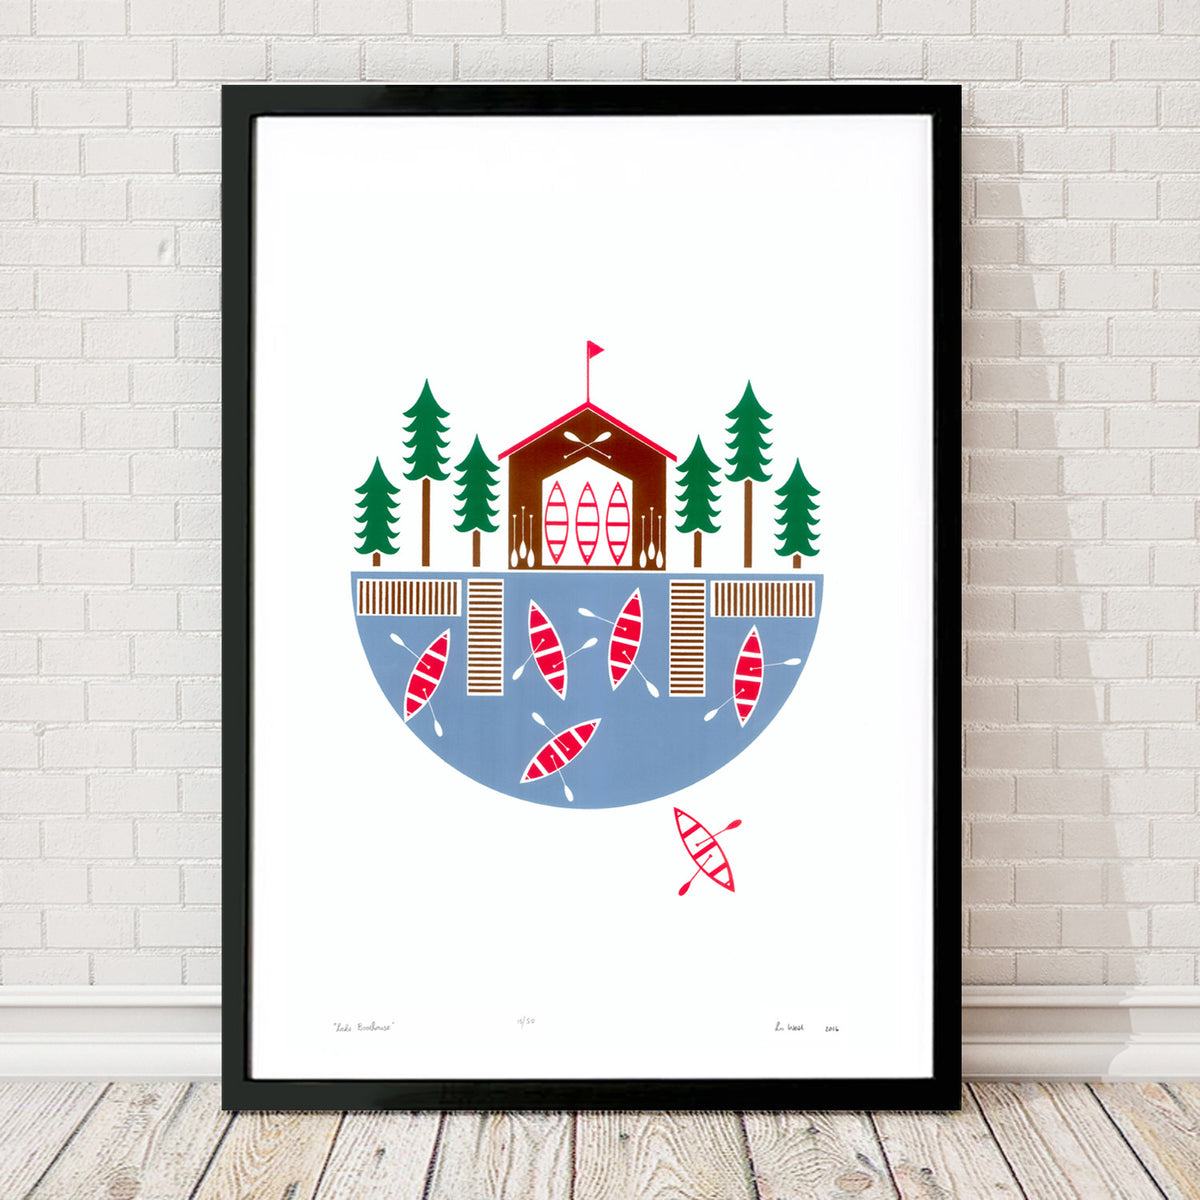 Explore the great outdoors with this charming lakeside inspired print. This graphic Scandinavian style print will remind you of beautiful Summers at the lake.